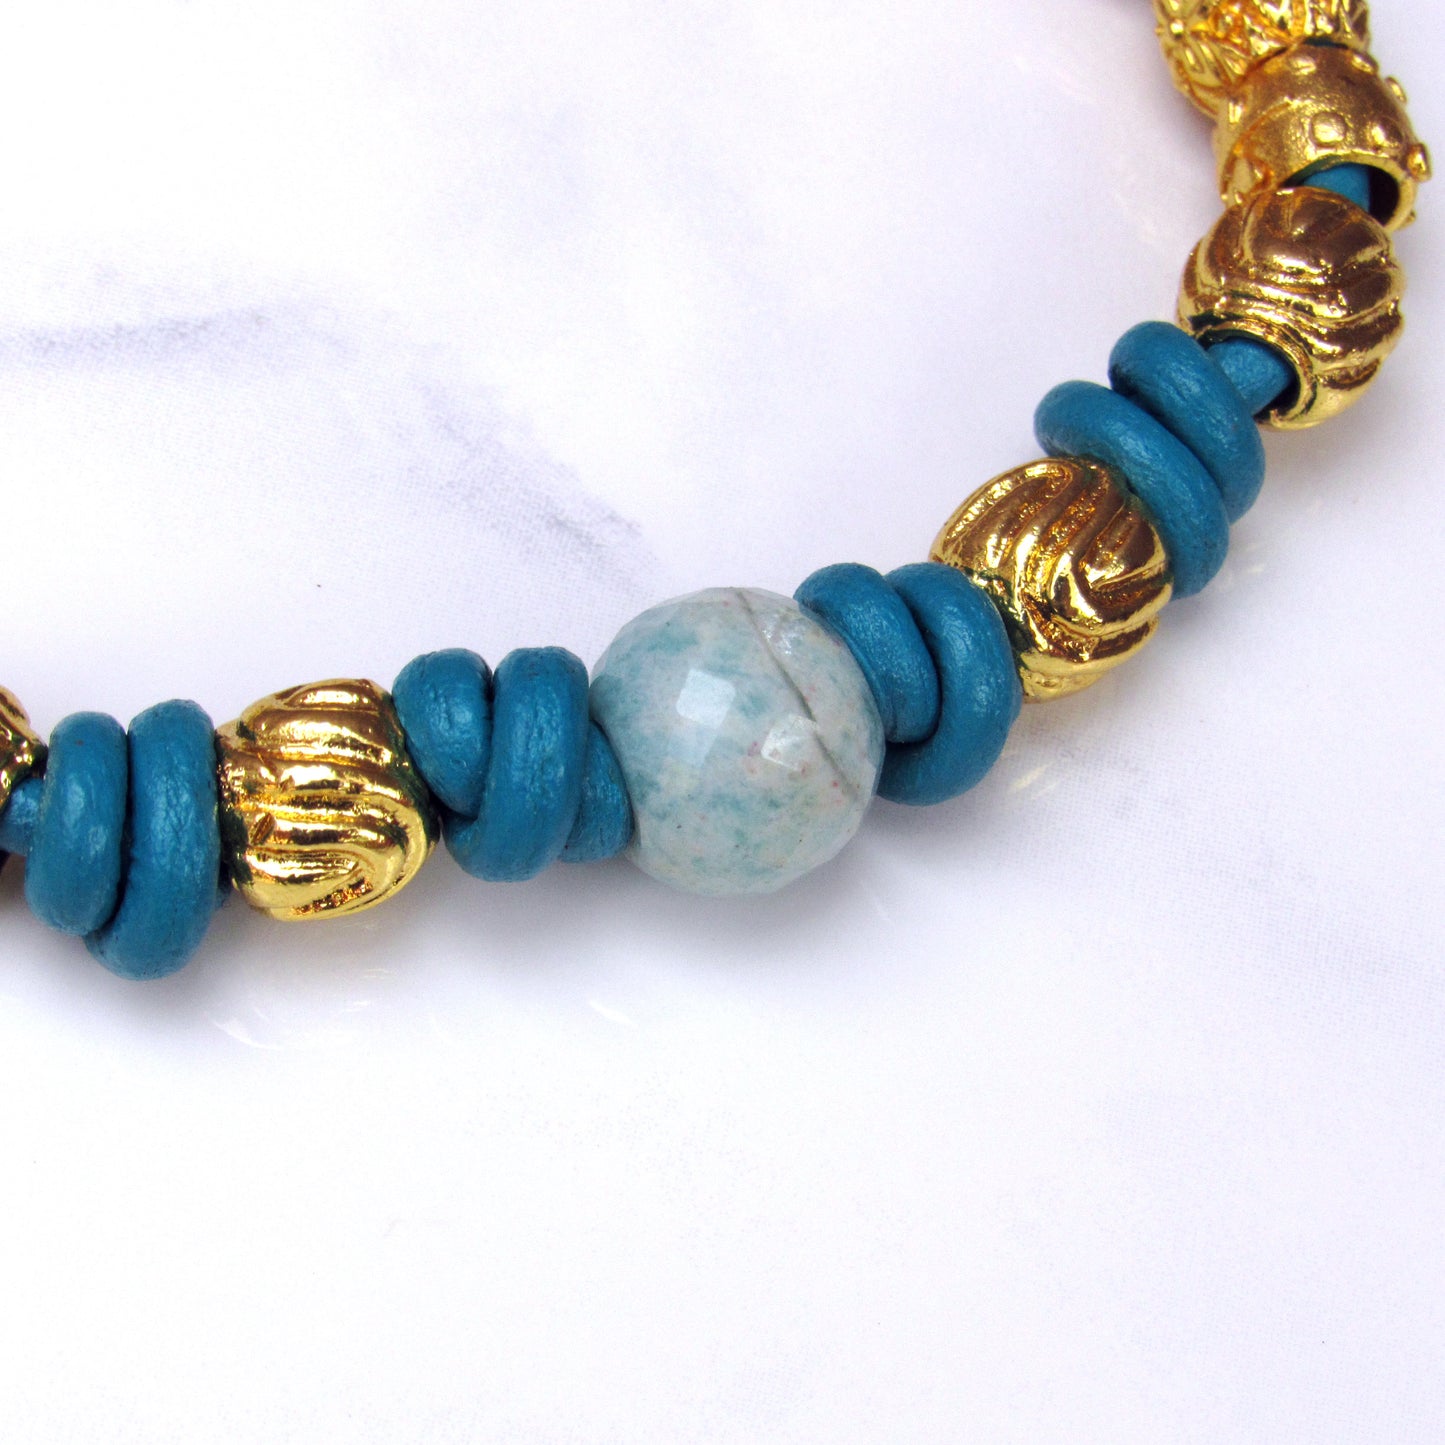 Amazonite gemstone with Bali Beads on hand knotted Leather